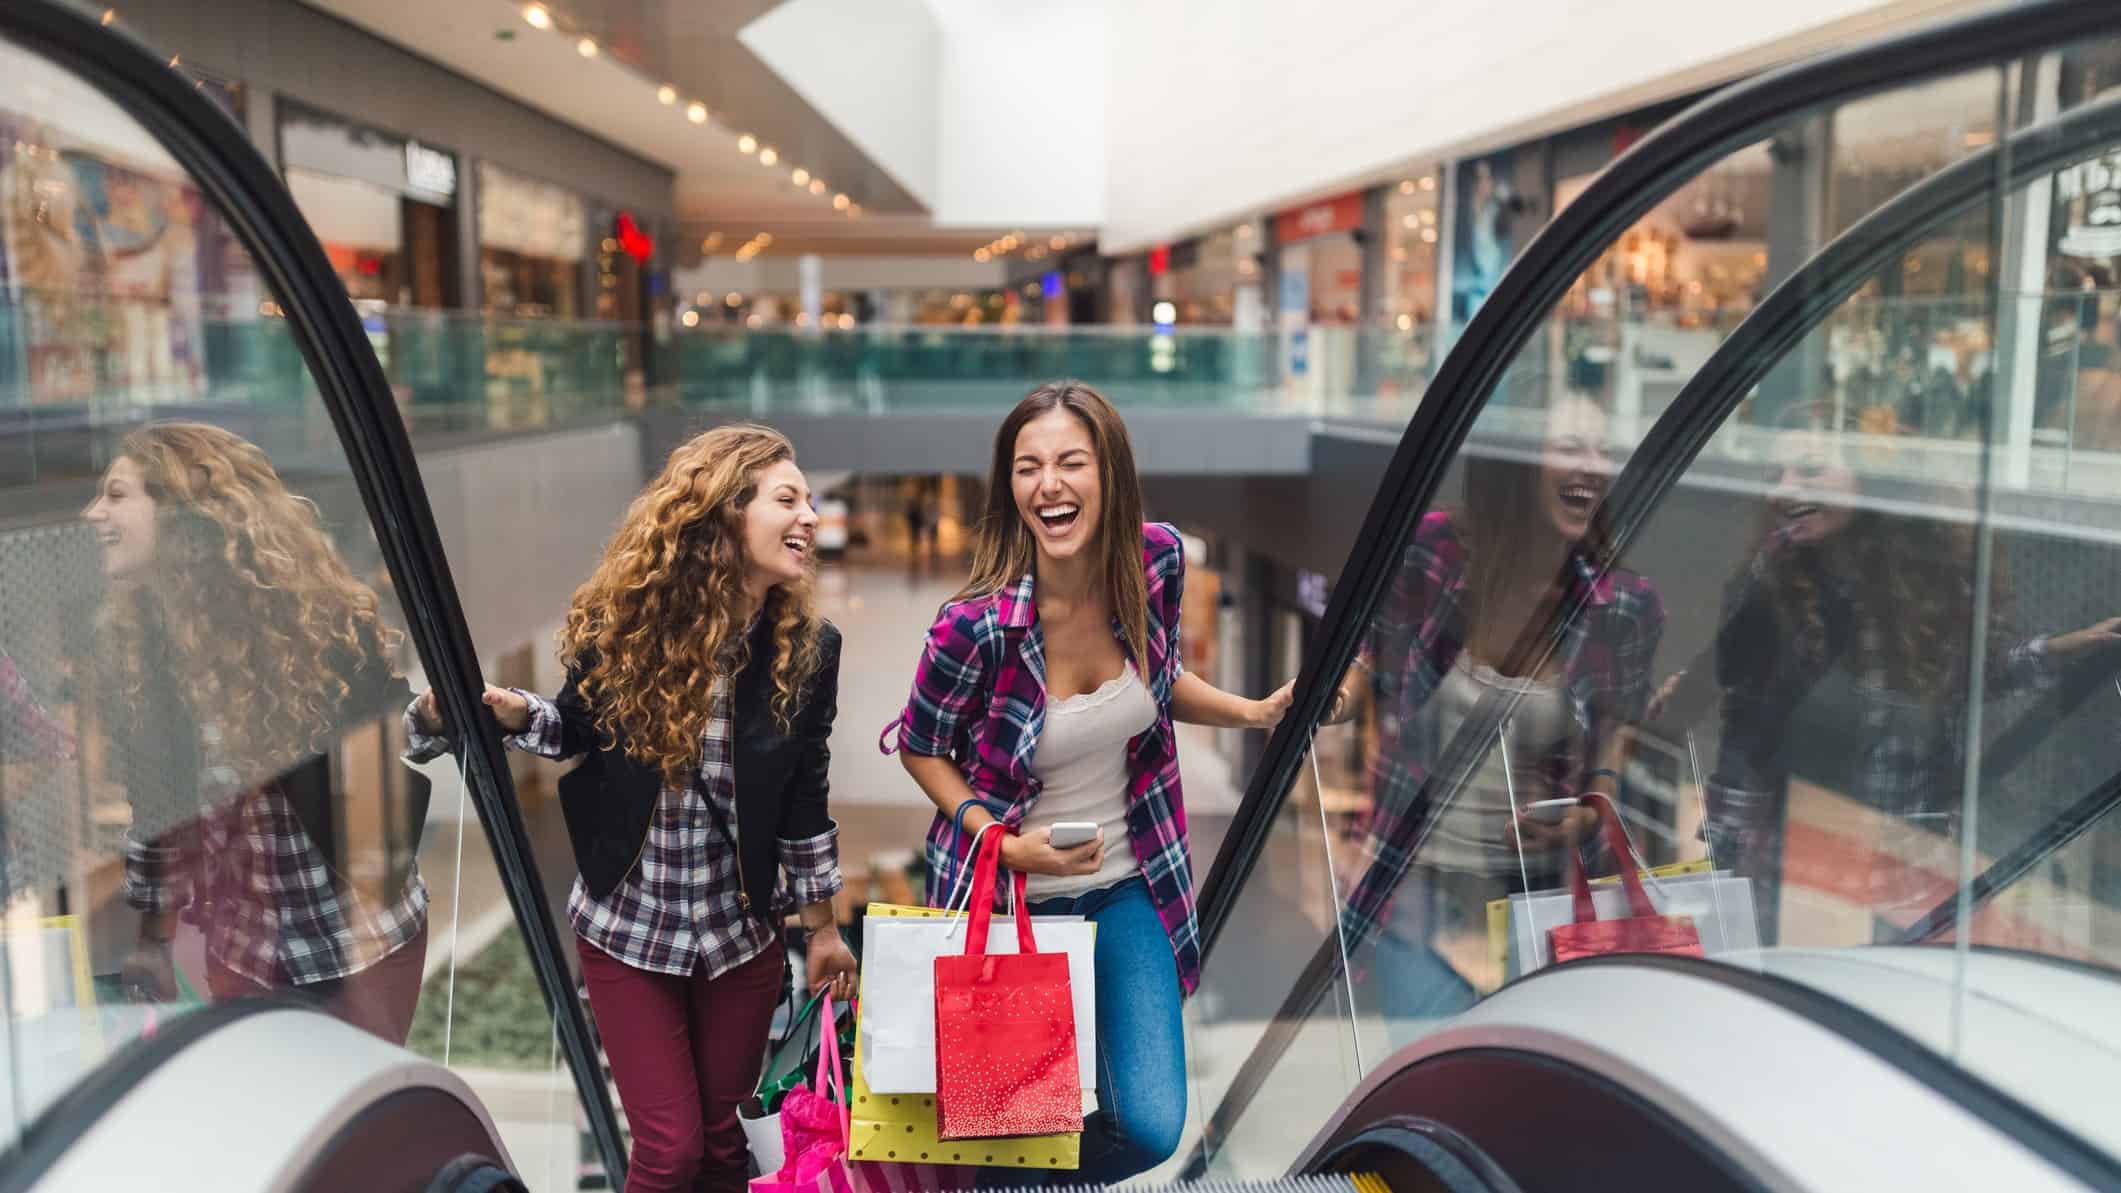 Two laughing young women holding shopping bags ride an escalator up to another level in a Scentre Group shopping centre